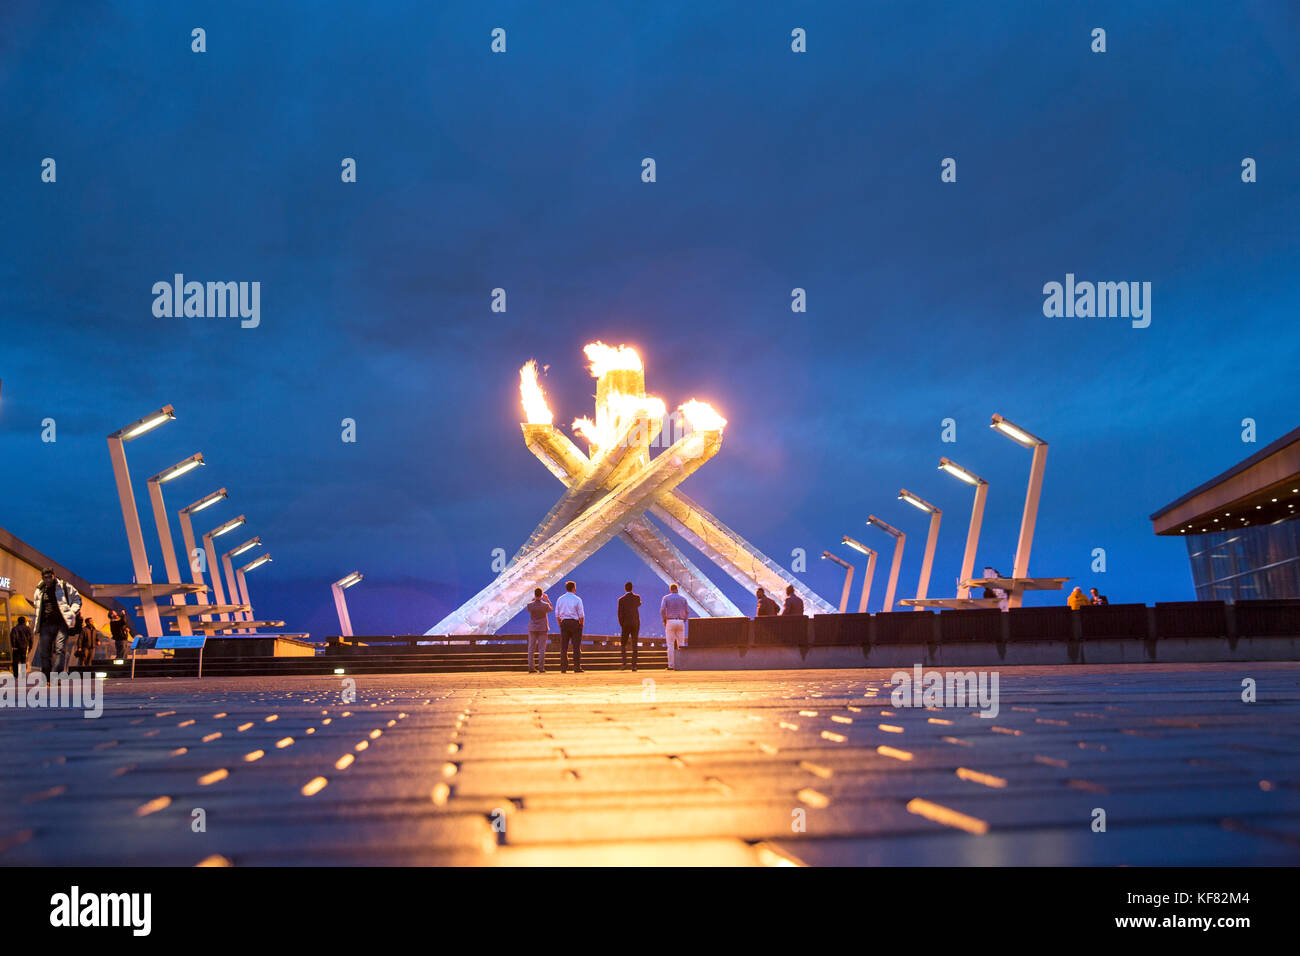 CANADA, Vancouver, British Columbia, located next to the Vancouver Convention Center the sculpture Olympic Cauldron lights up on a Summers night in Co Stock Photo